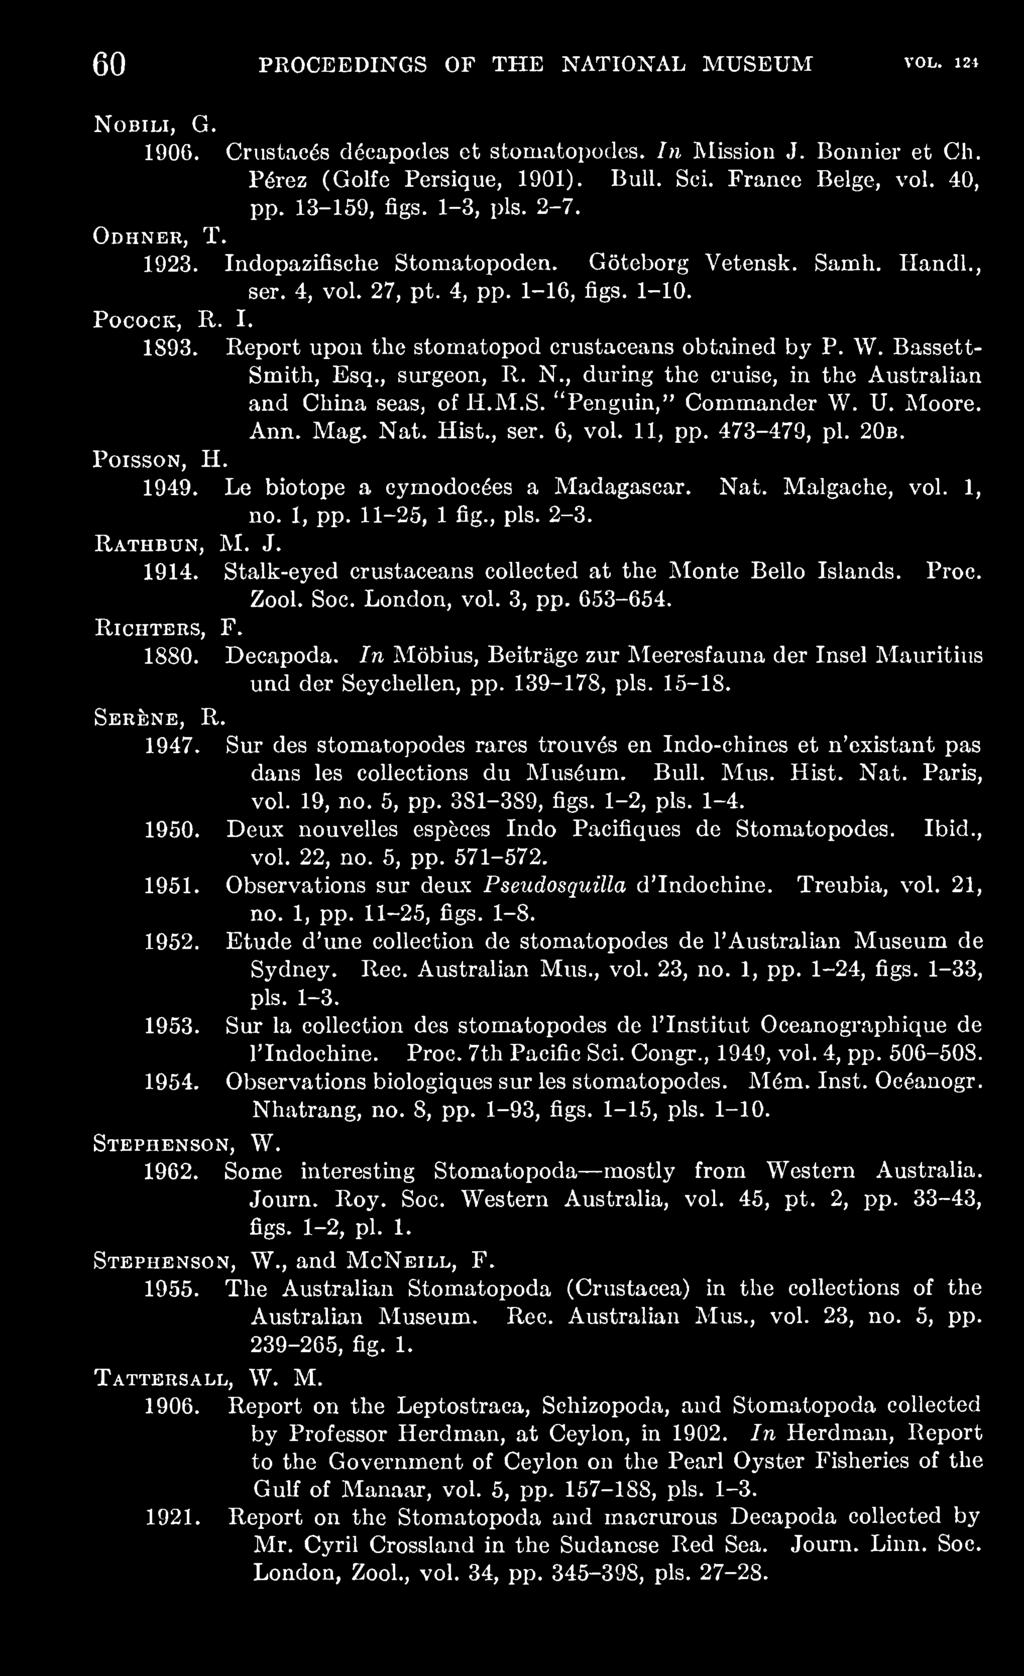 Report upon the stomatopod crustaceans obtained by P. W. Bassett- Smith, Esq., surgeon, R. N., during the cruise, in the Australian and China seas, of H.M.S. "Penguin," Commander W. U. Moore. Ann.